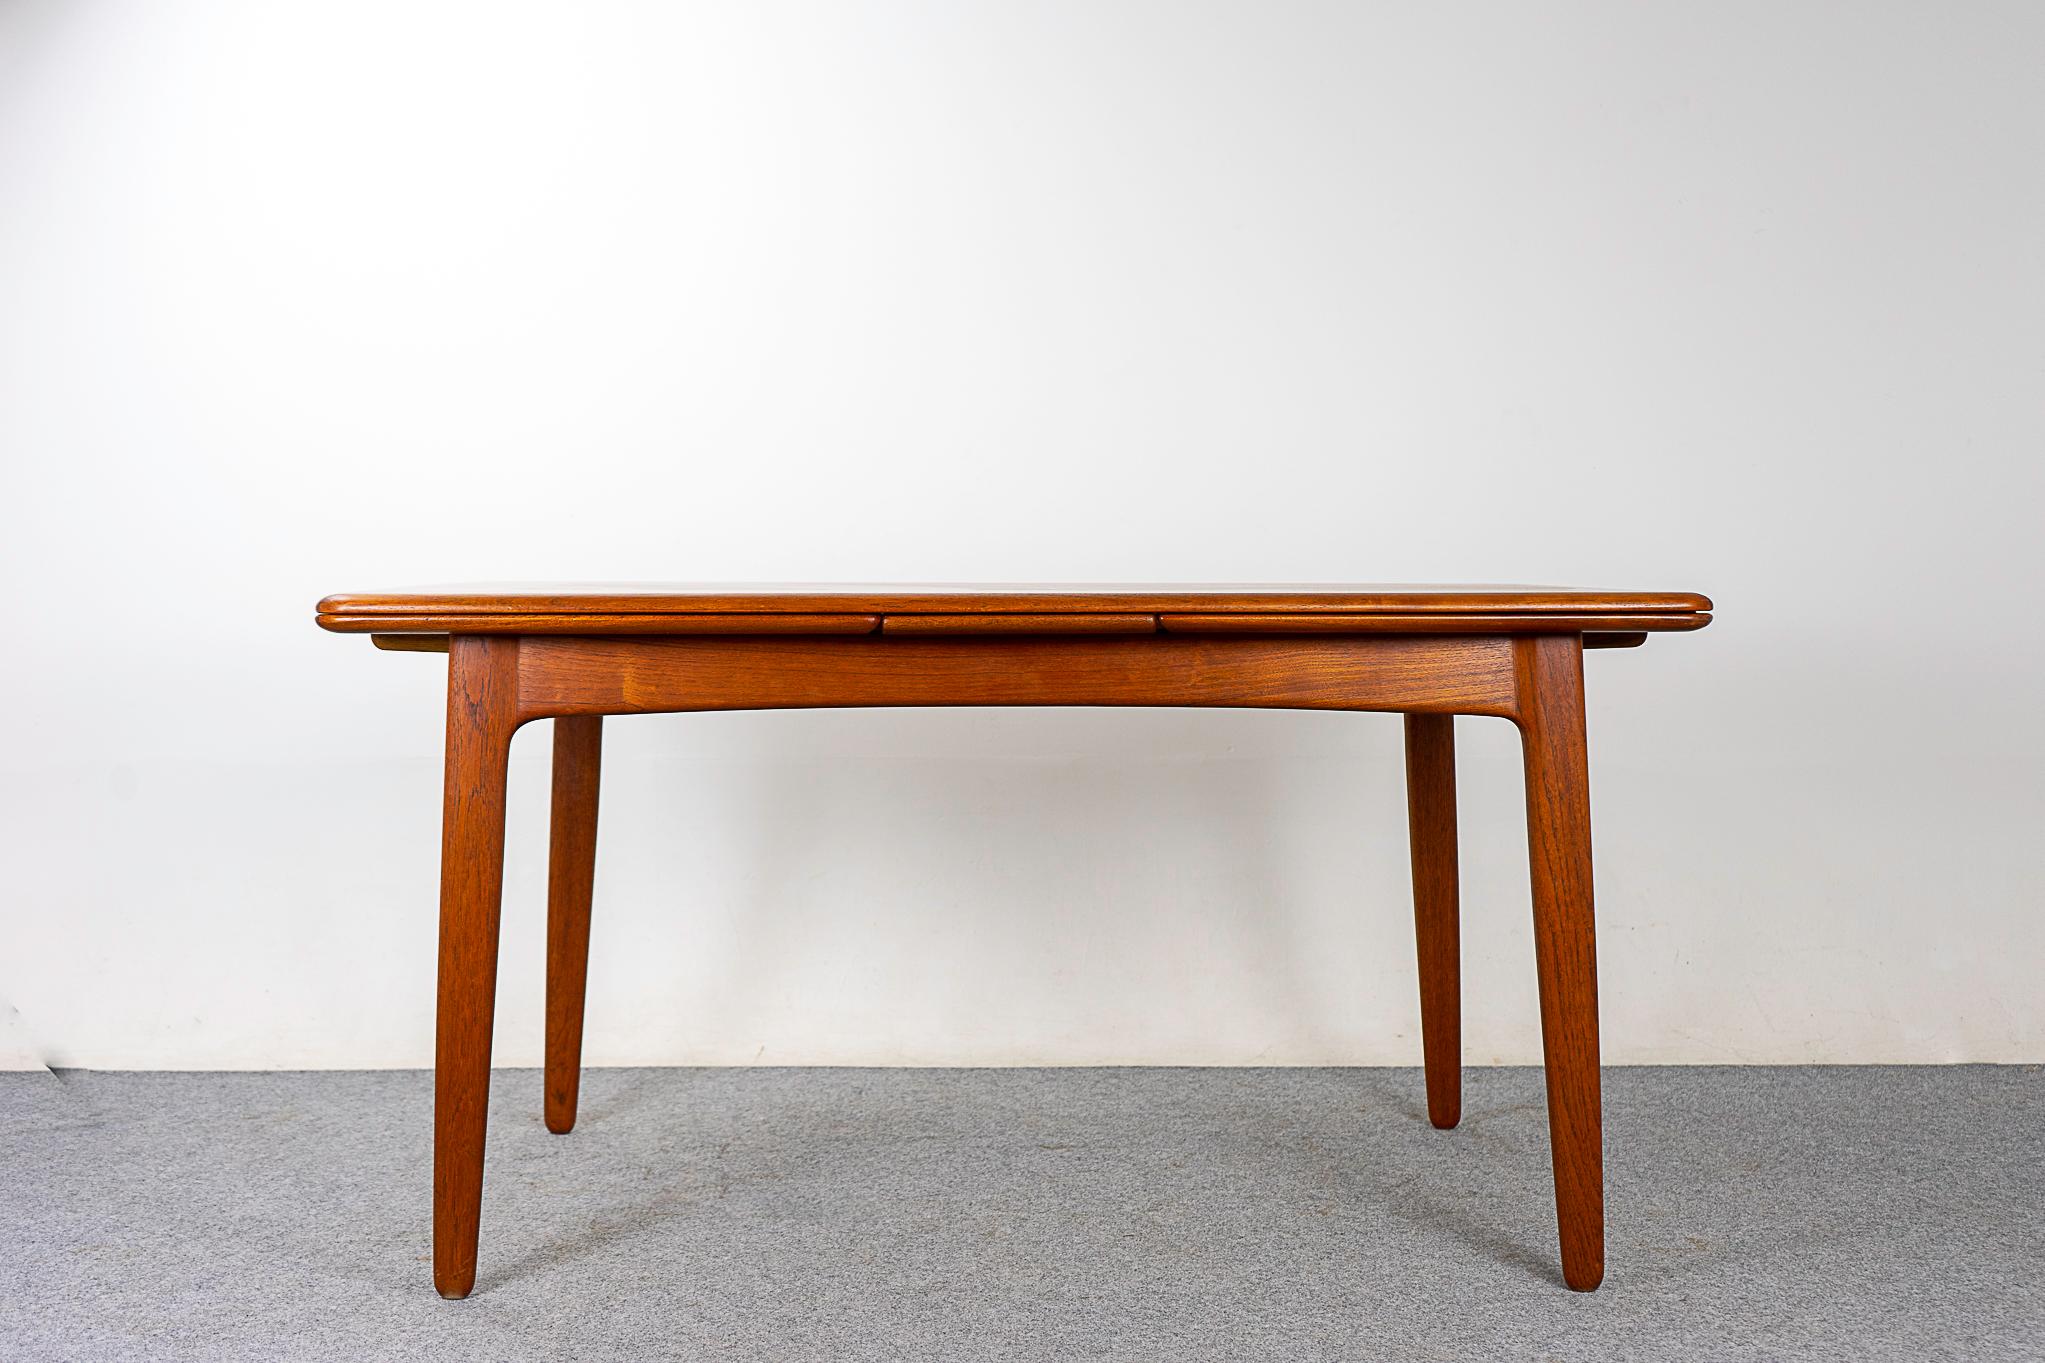 Teak draw leaf dining table by Svend Madsen for K. Knudsen, circa 1950s. A truly exceptional level of quality & construction. Richly grained teak with expertly bookmatched top surface, generous solid edging and gorgeous patina. Beautifully